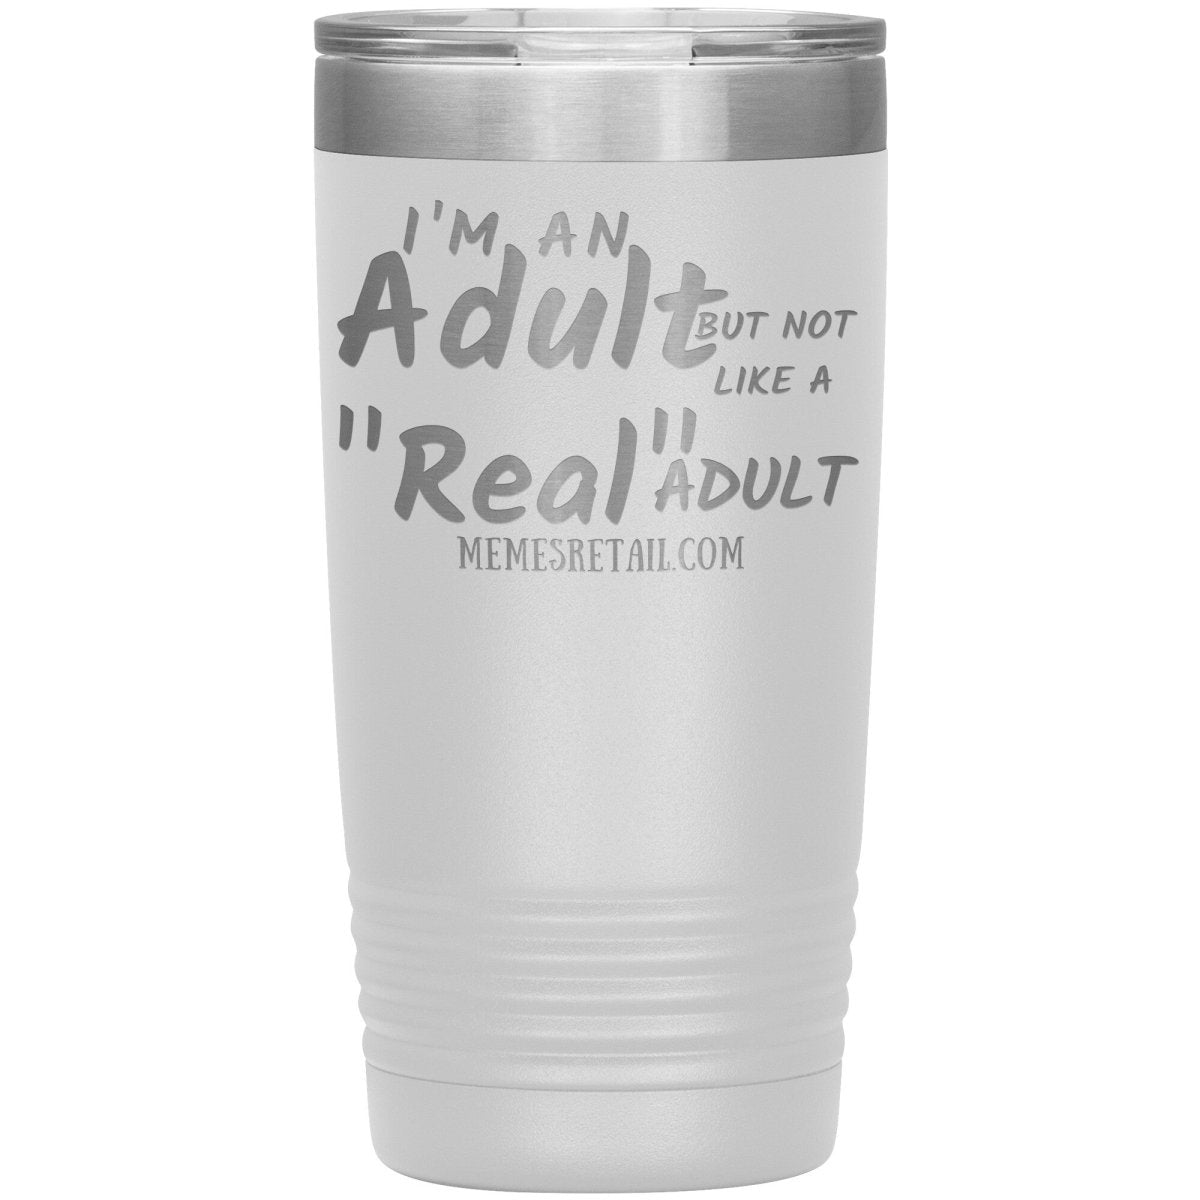 I'm an adult, but not like a "real" adult Tumblers, 20oz Insulated Tumbler / White - MemesRetail.com